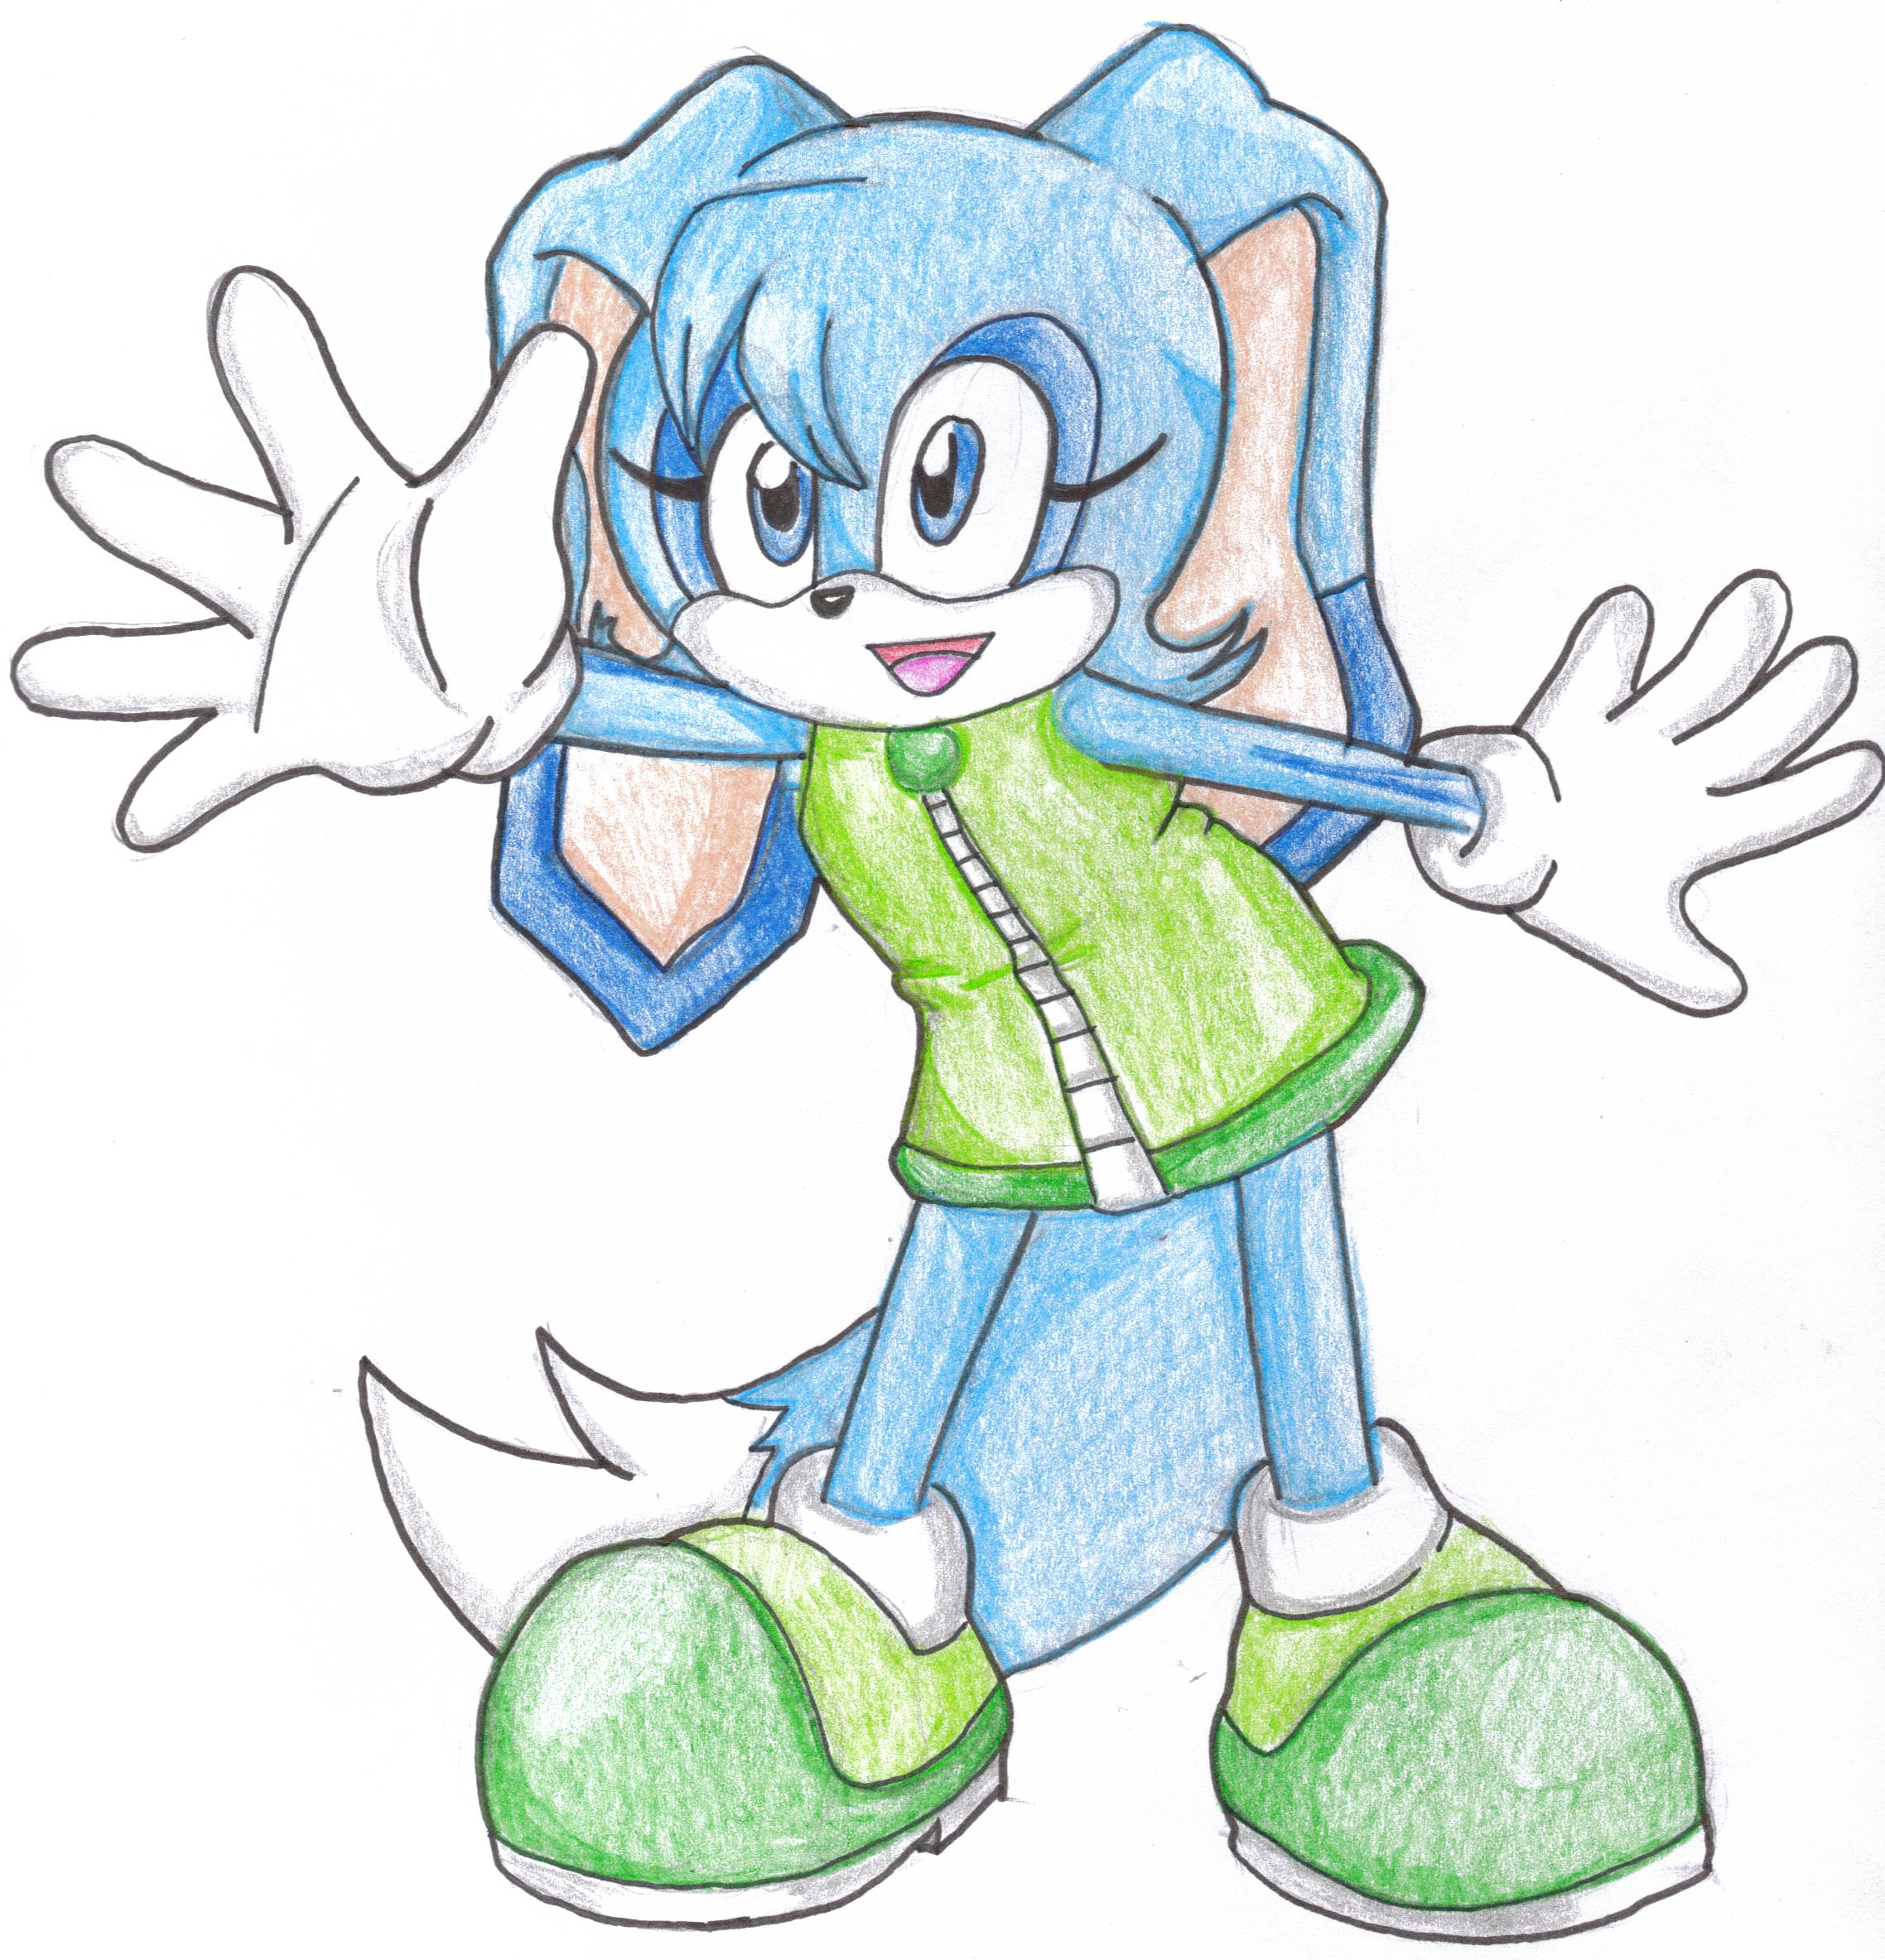 Aqua The Rabbit by windflame